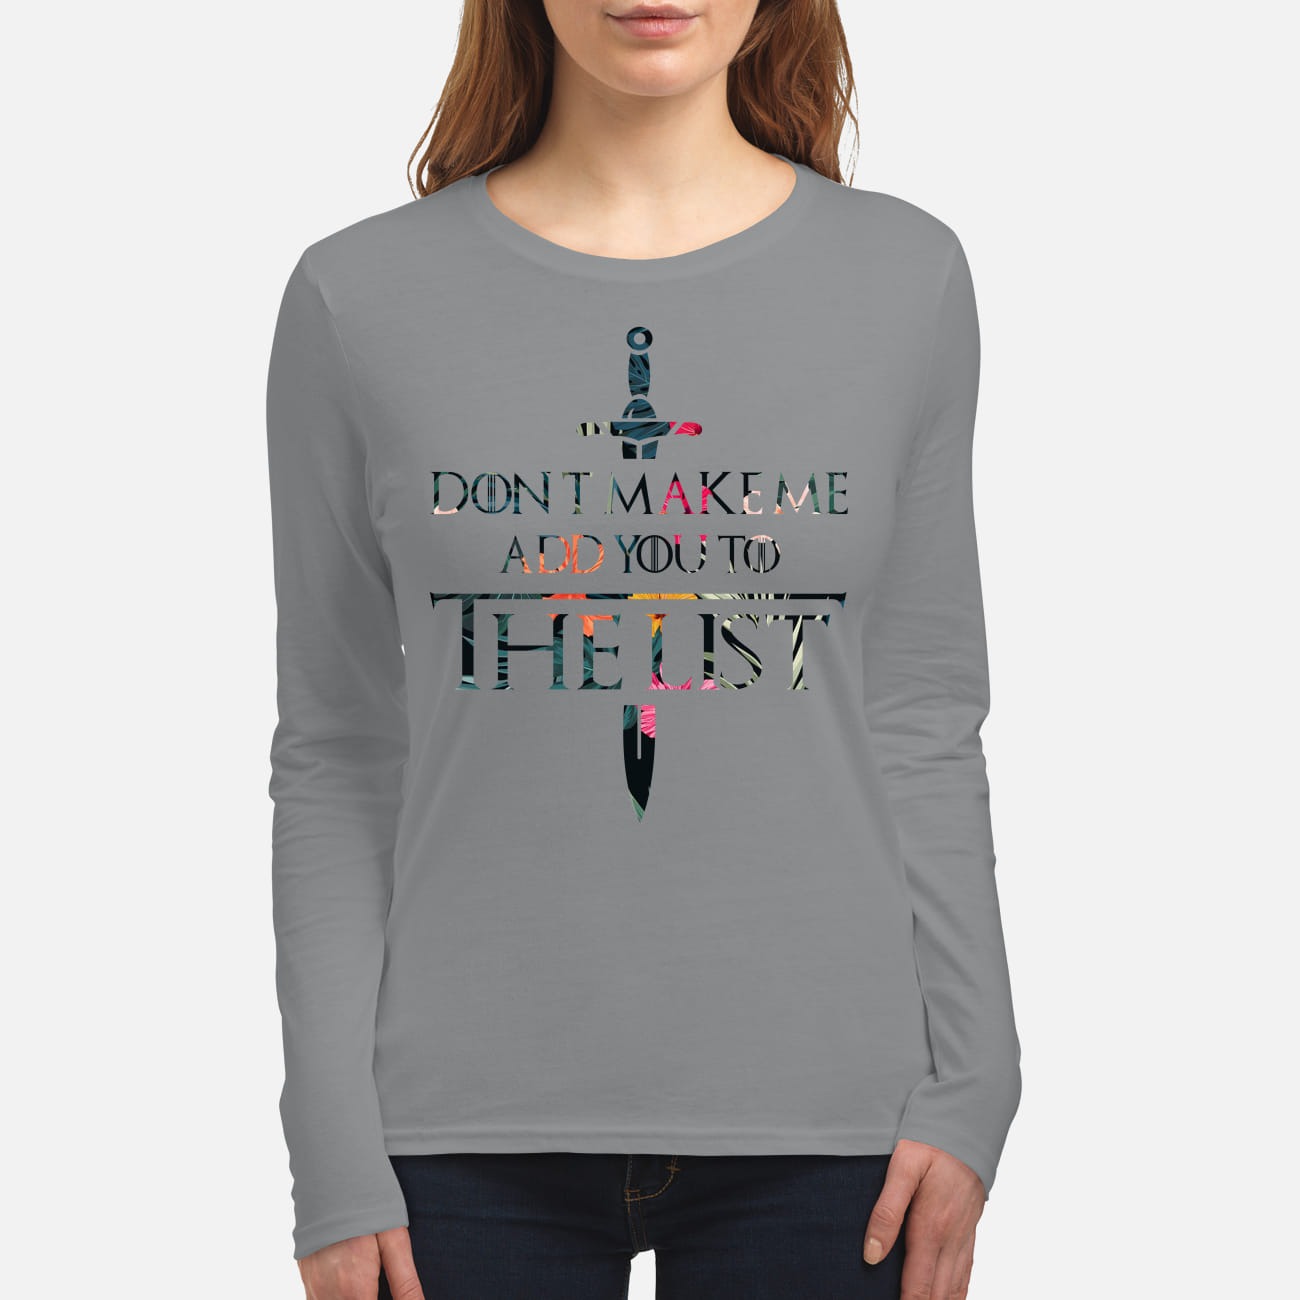 GOT don't make me add you to the list women's long sleeved shirt